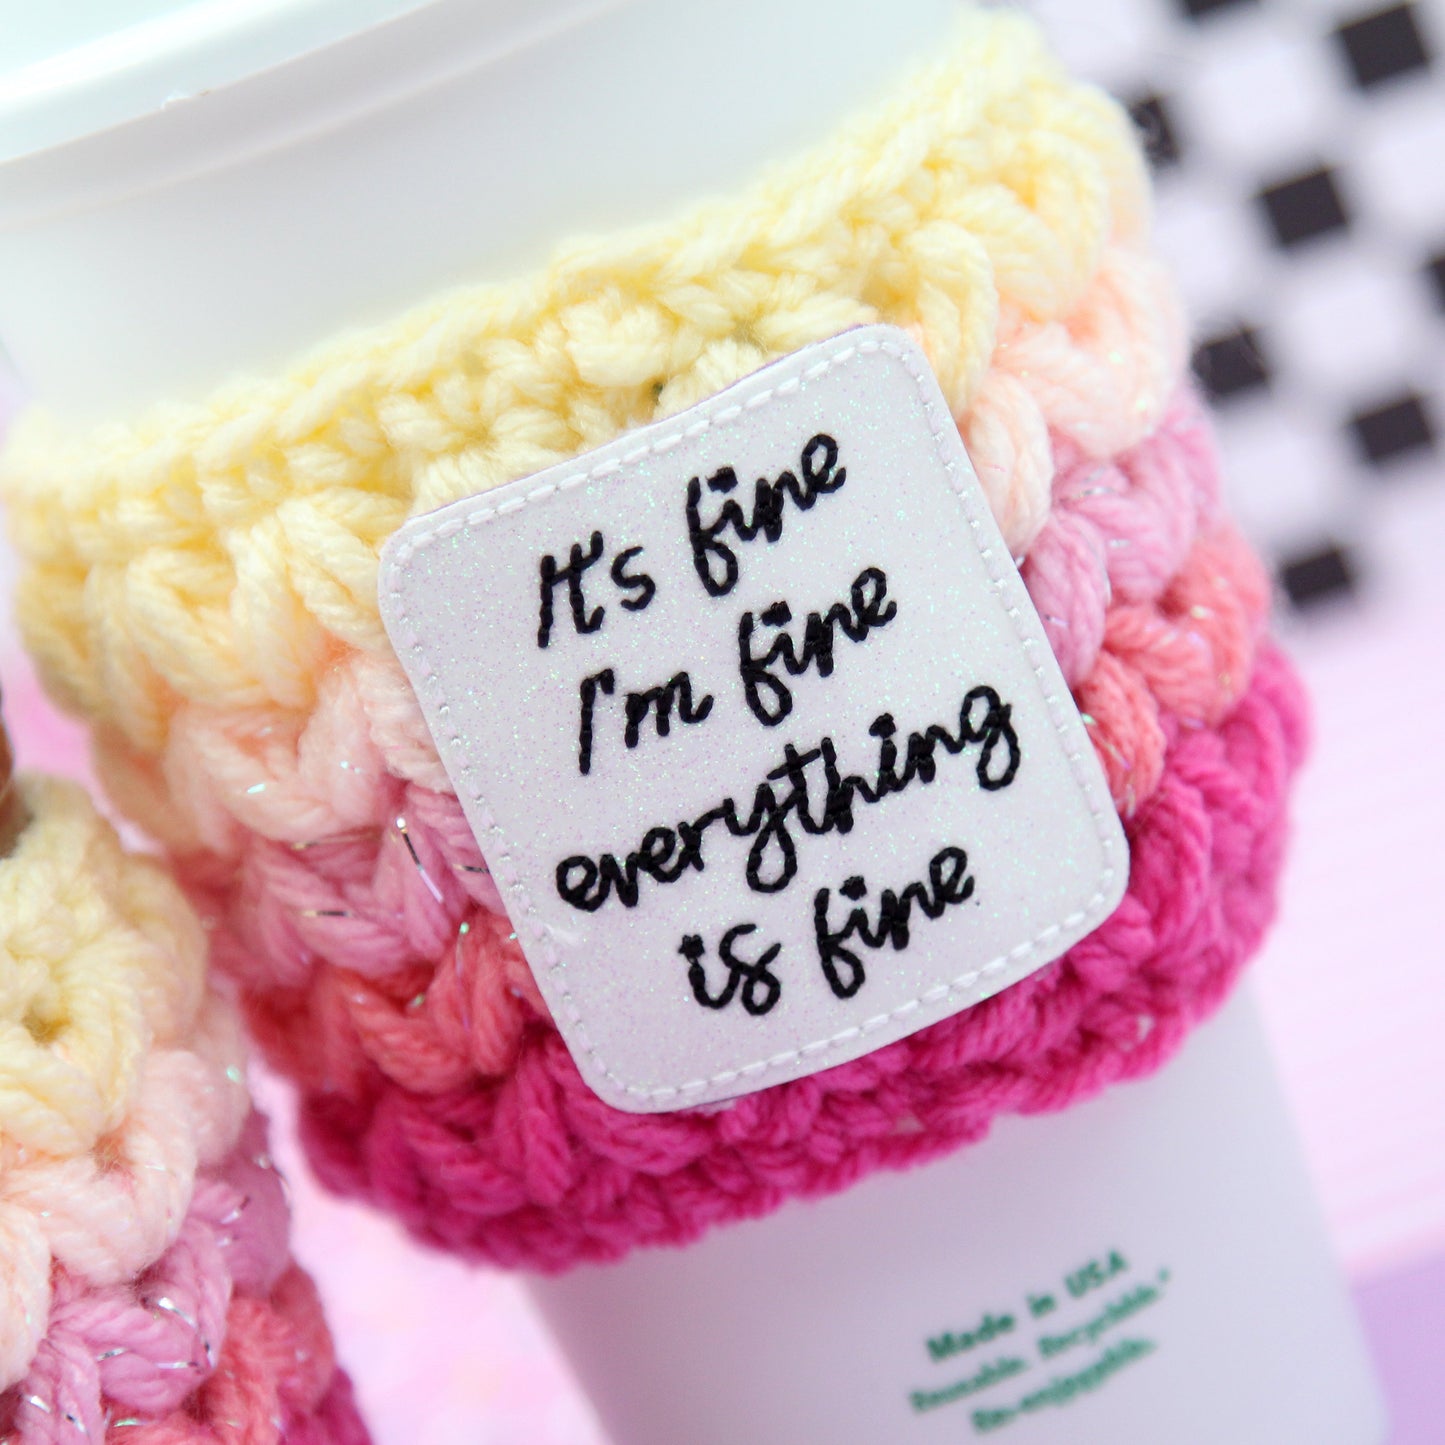 Everything Is Fine Crochet Cup Cozie Sleeve